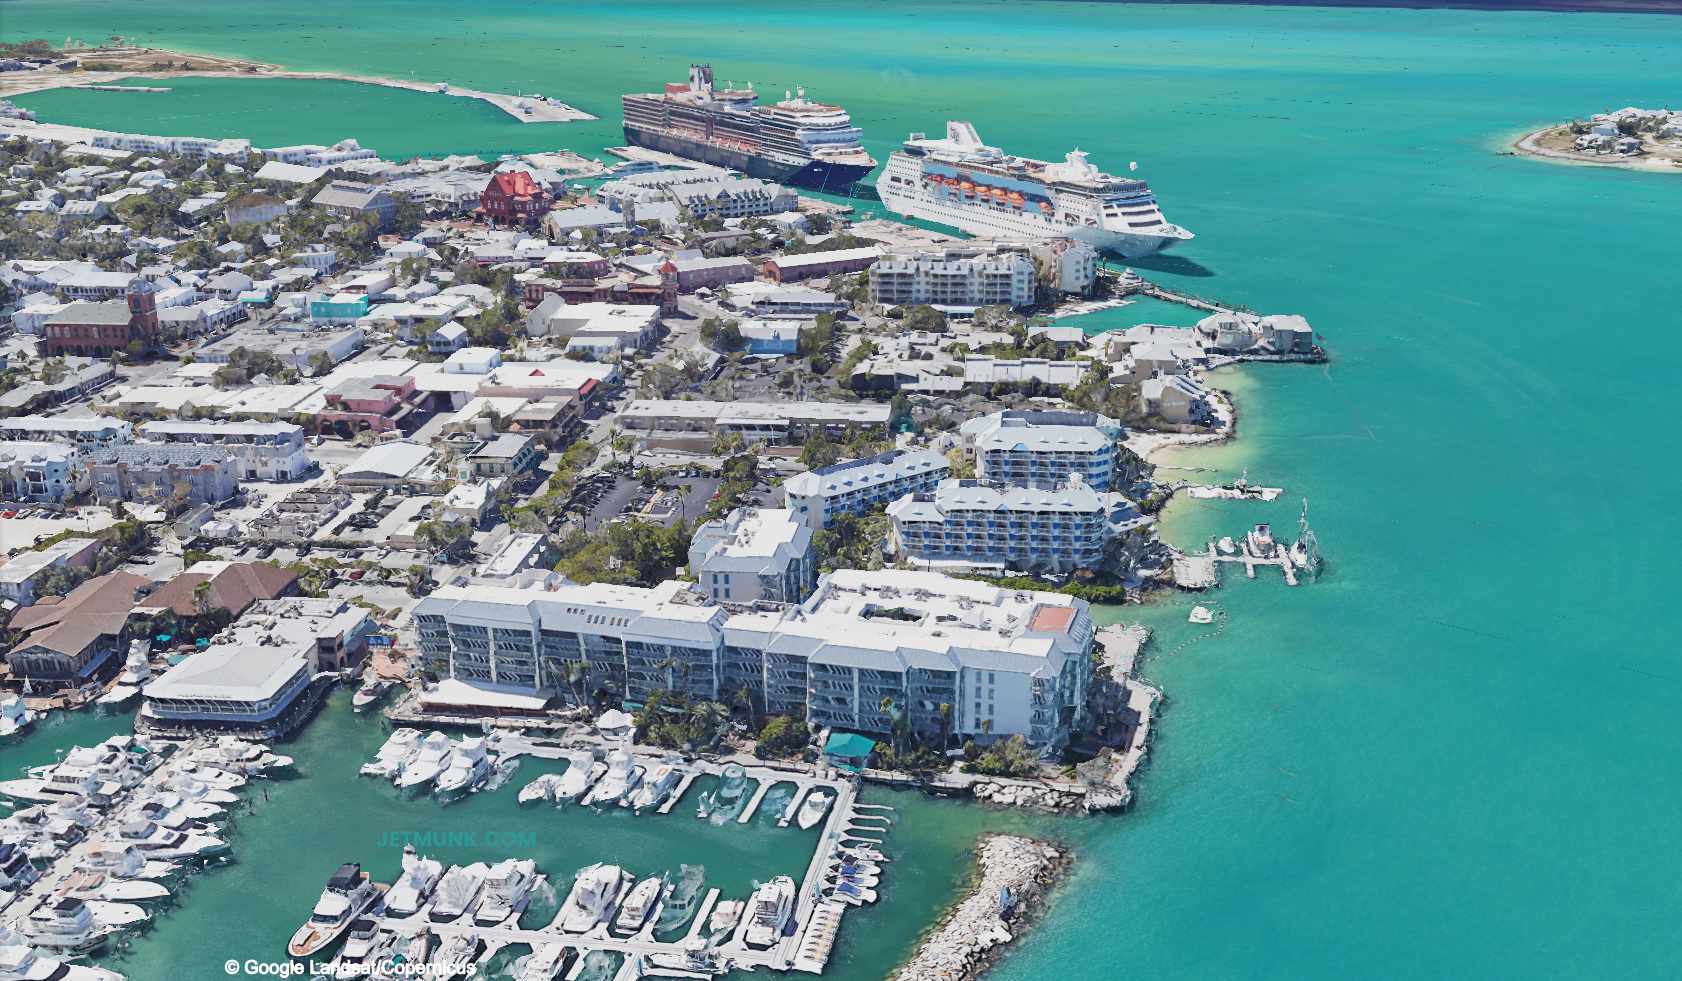 Where Do Cruise Ships Dock In Key West?